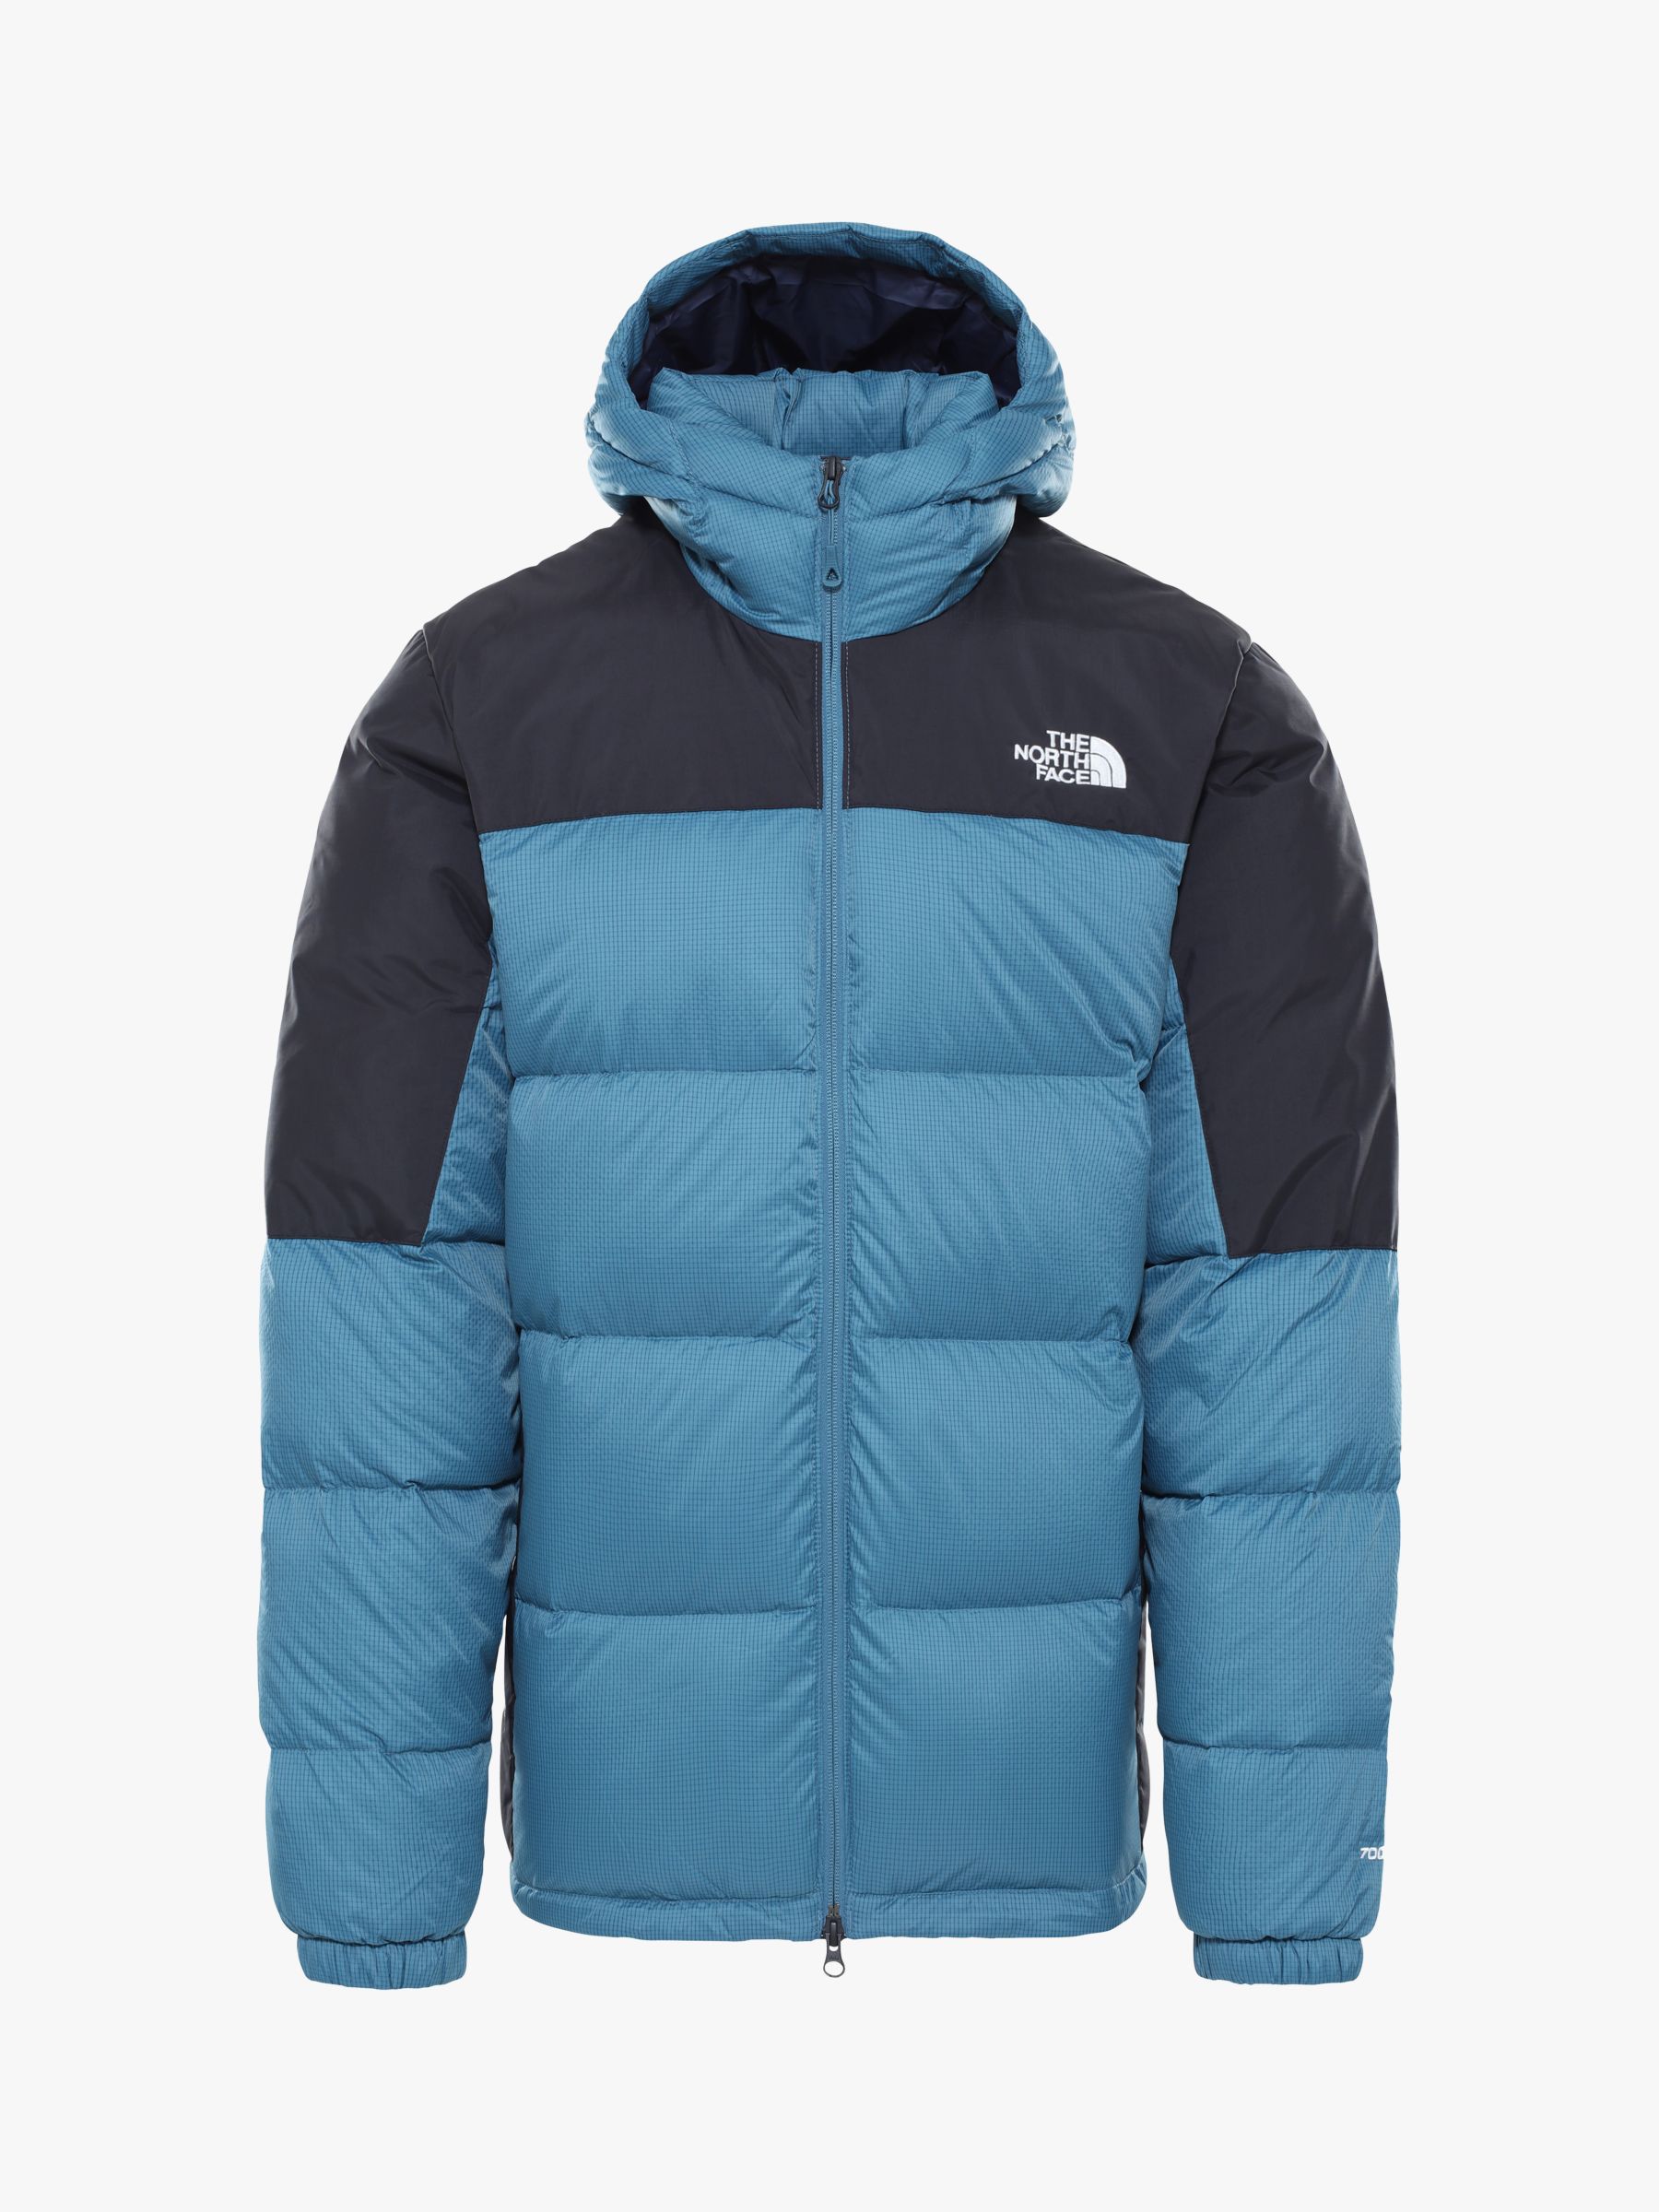 north face coat with hood